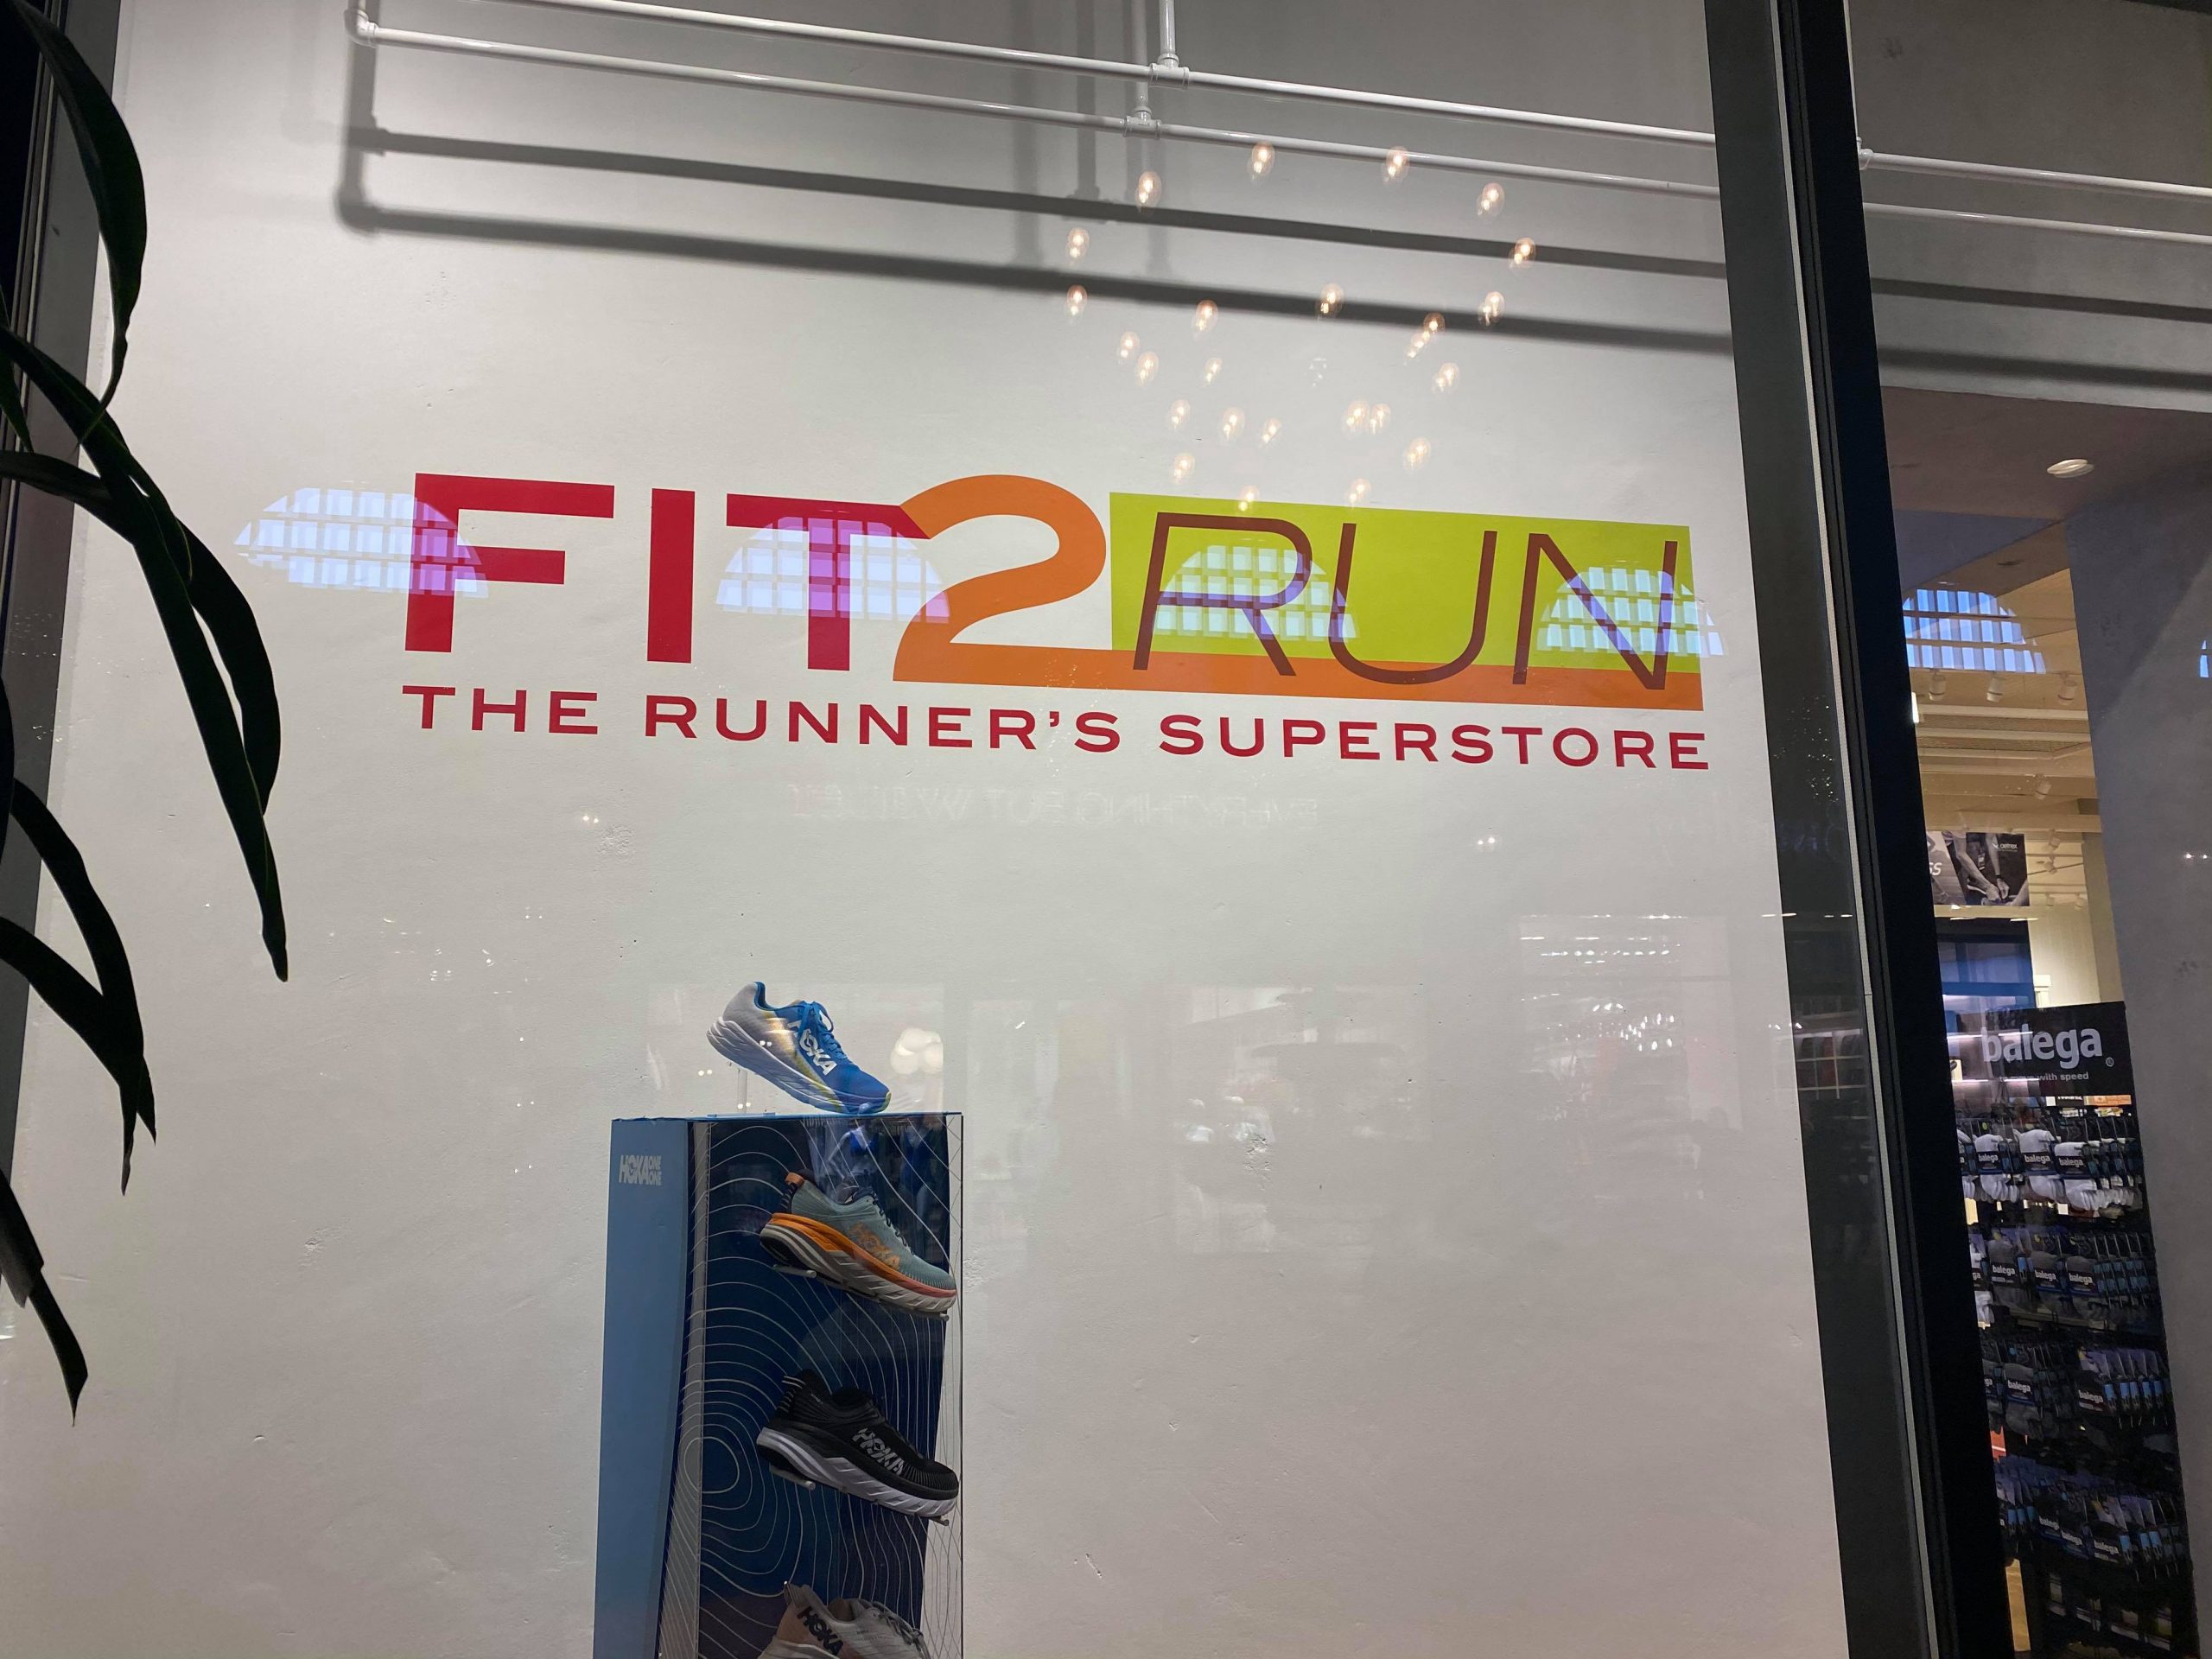 Fit2Run at Disney Springs - The Runner's Superstore